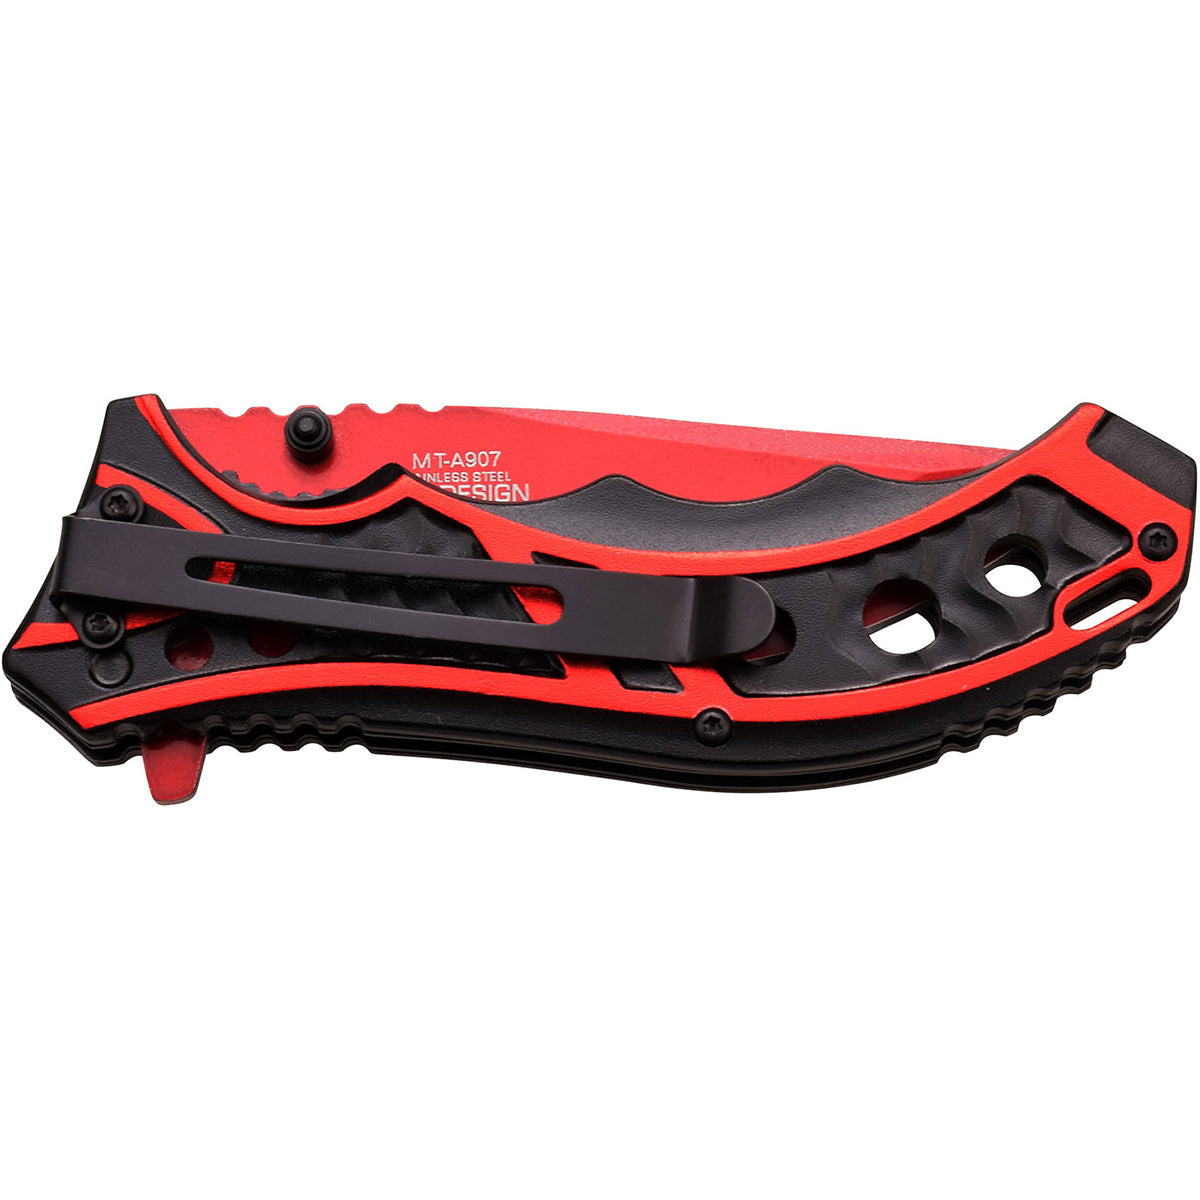 MTech USA Linerlock Spring Assisted Folding Knife, 3.5" Red Blade, MT-A907RD M-Tech